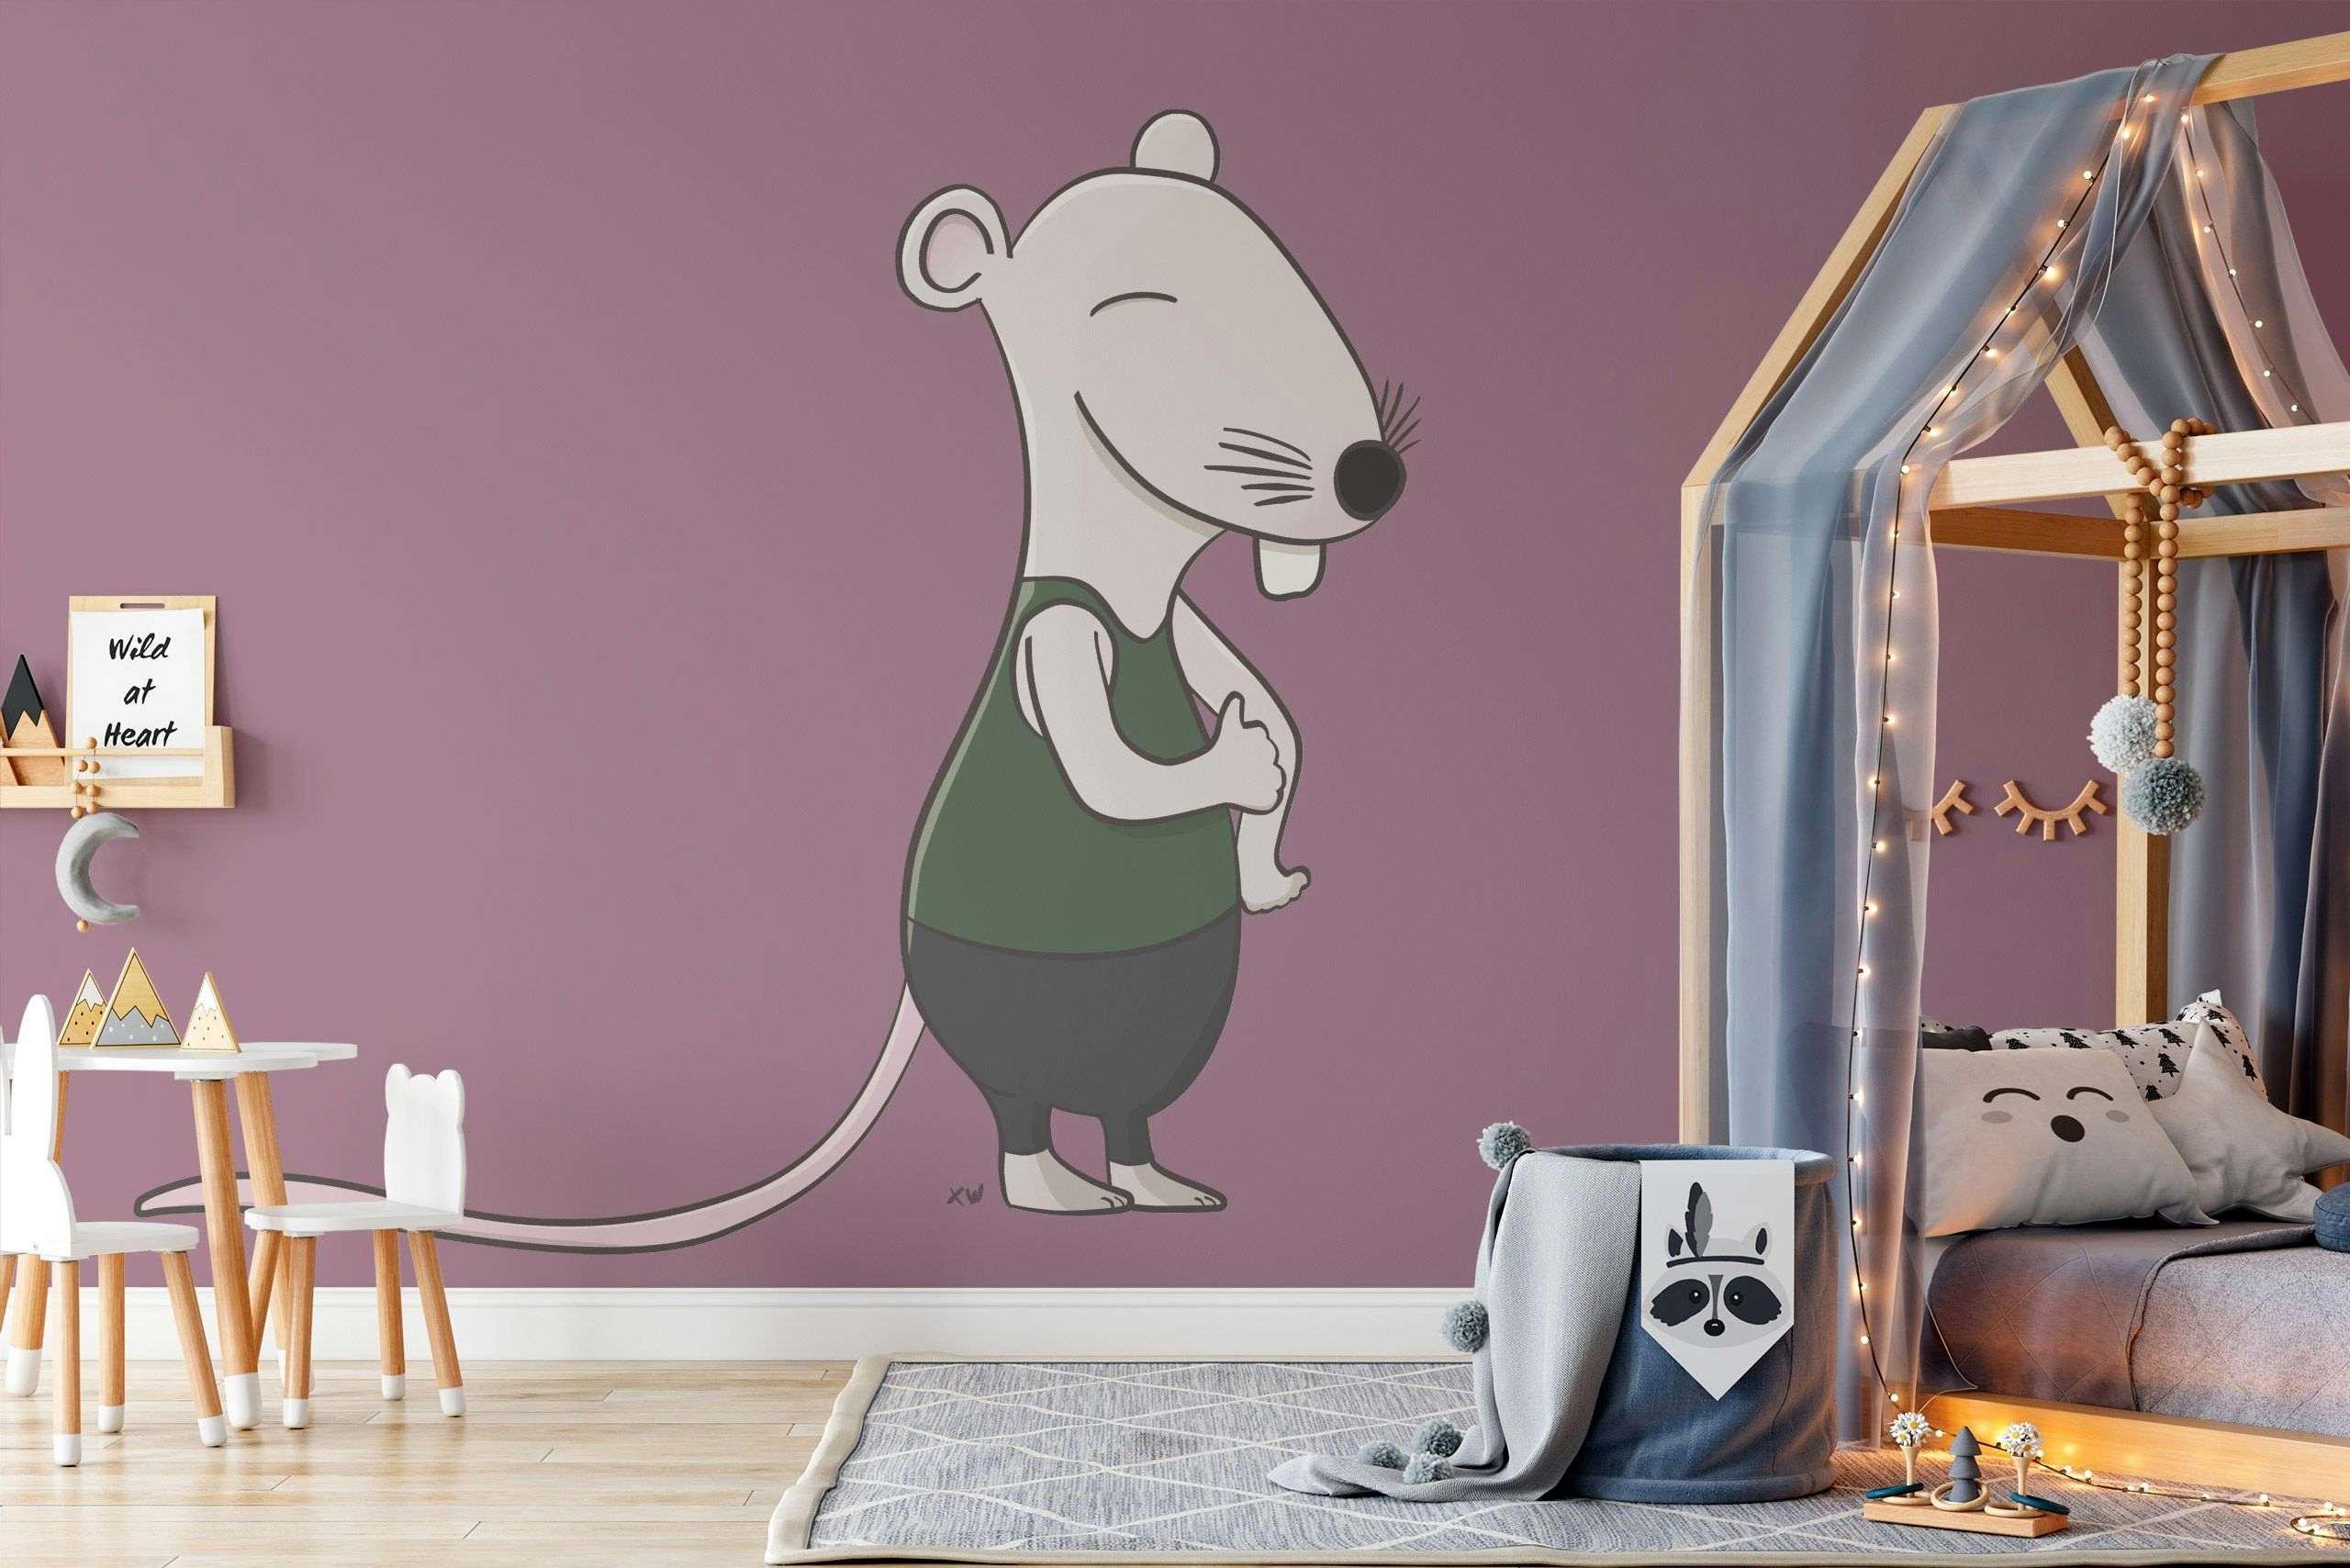 Friendly cartoon rat wall mural by Xavier Wendling, available on my Society6 shop.